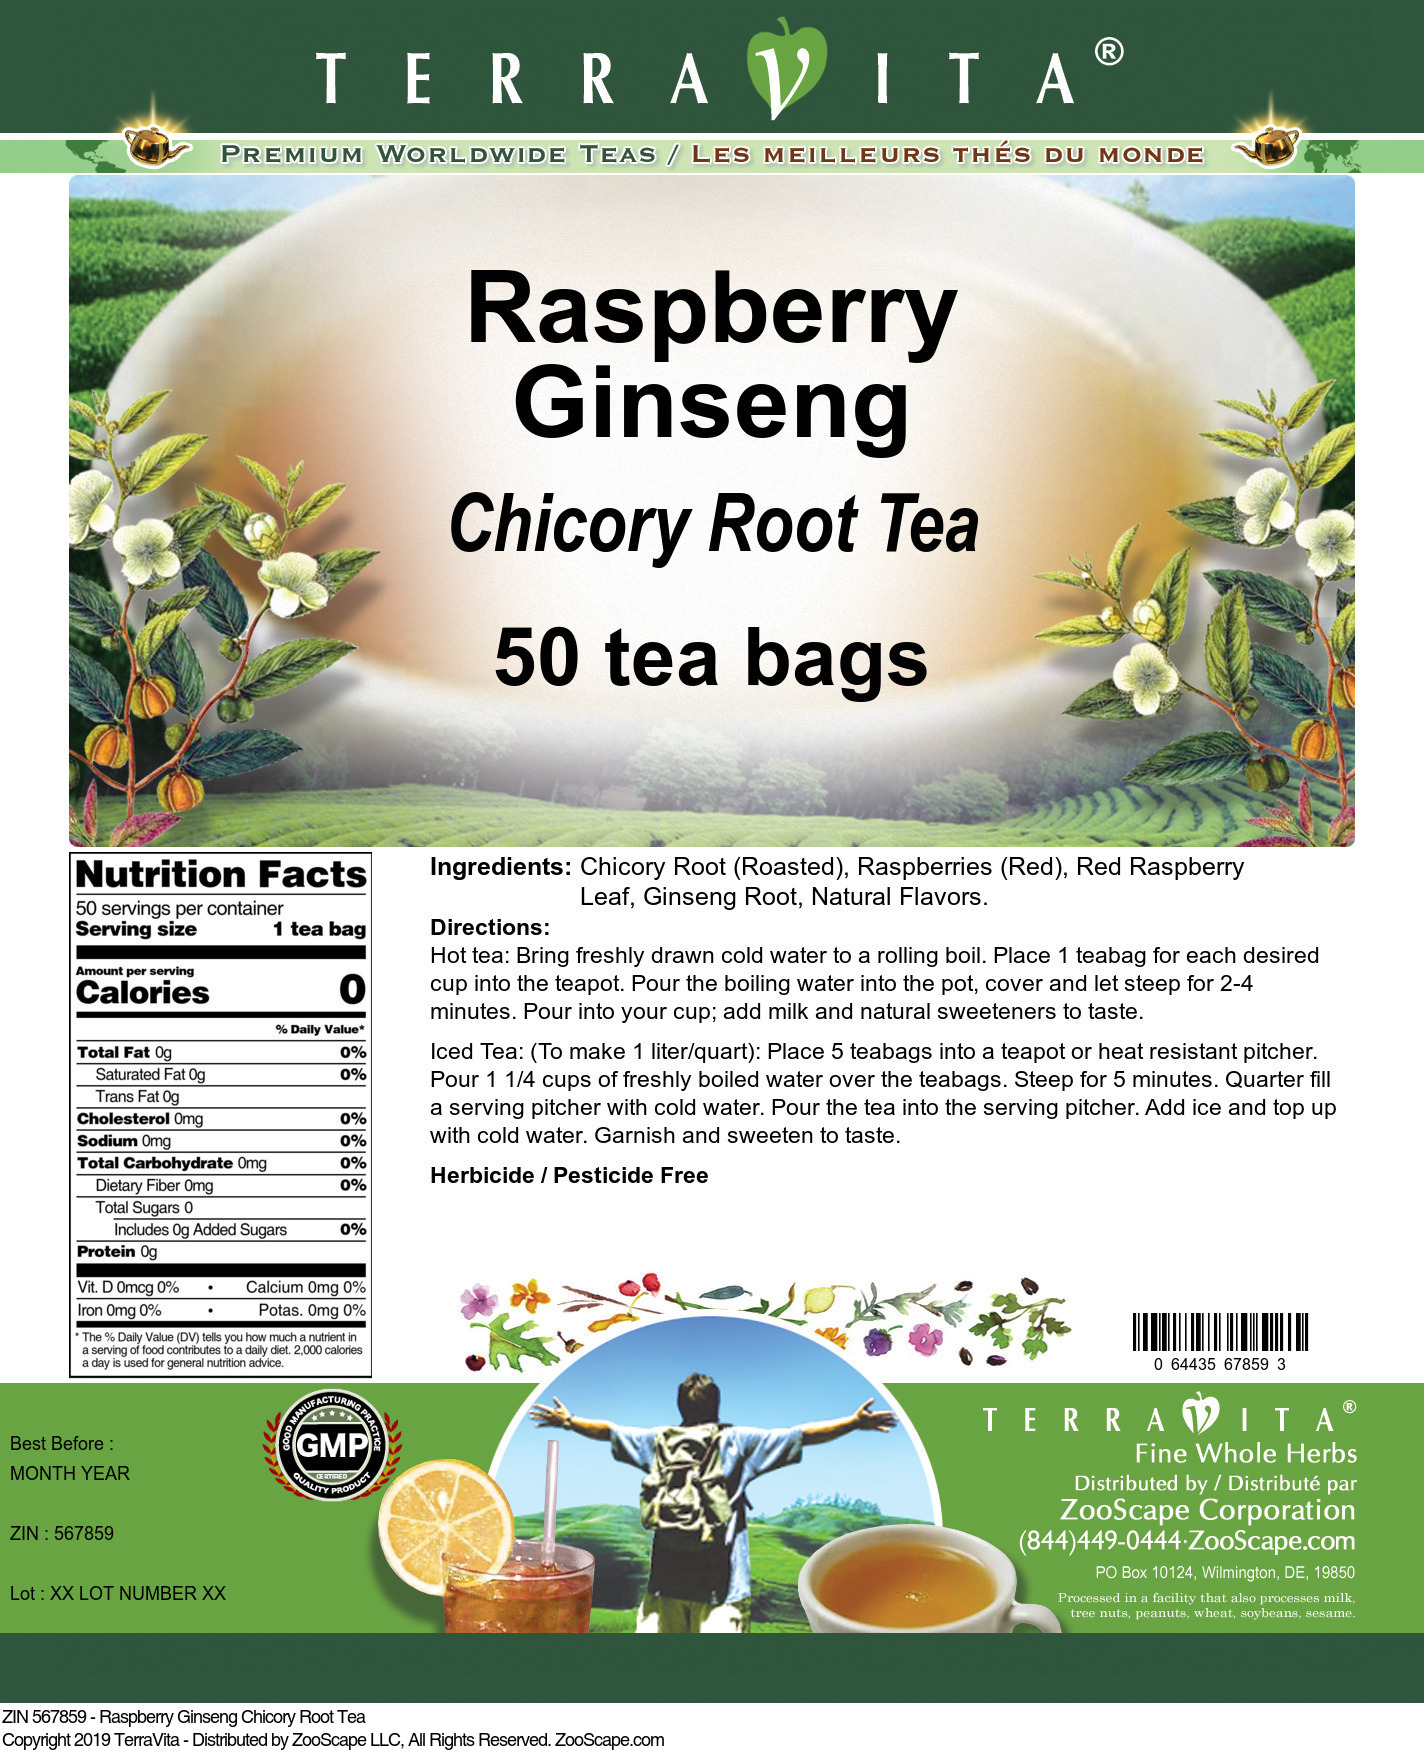 Raspberry Ginseng Chicory Root Tea - Label